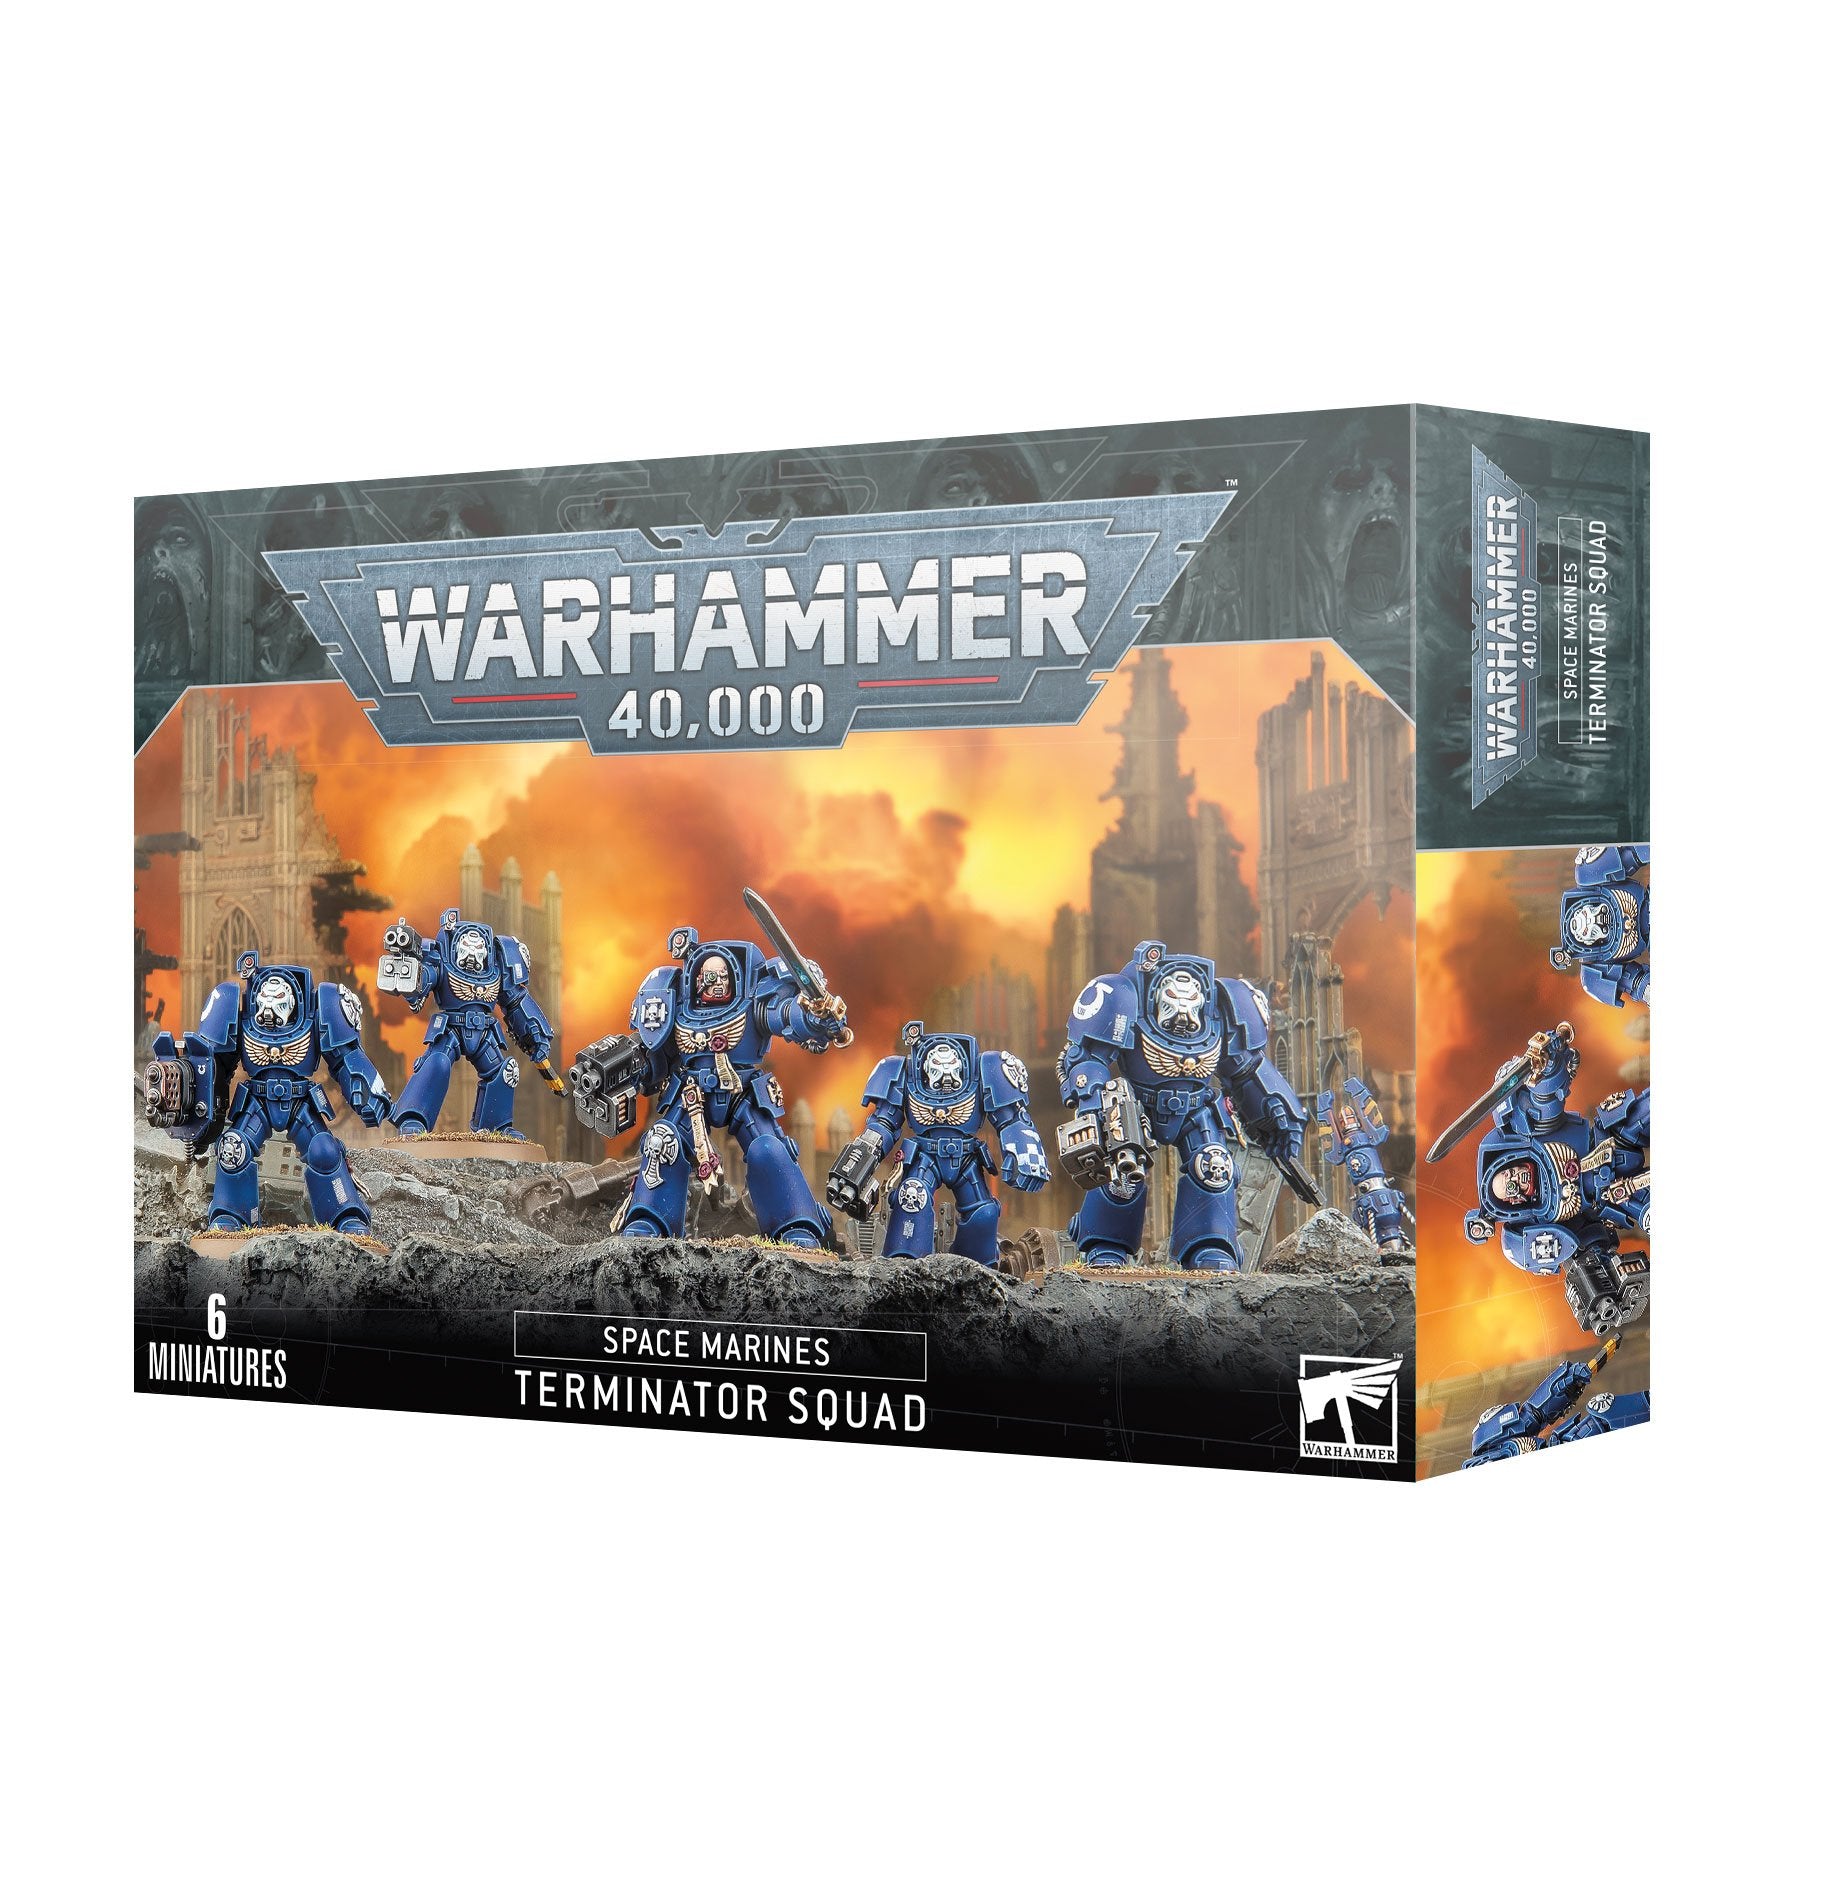 Space Marines: Terminator Squad - Release Date 14/10/23 - Loaded Dice Barry Vale of Glamorgan CF64 3HD